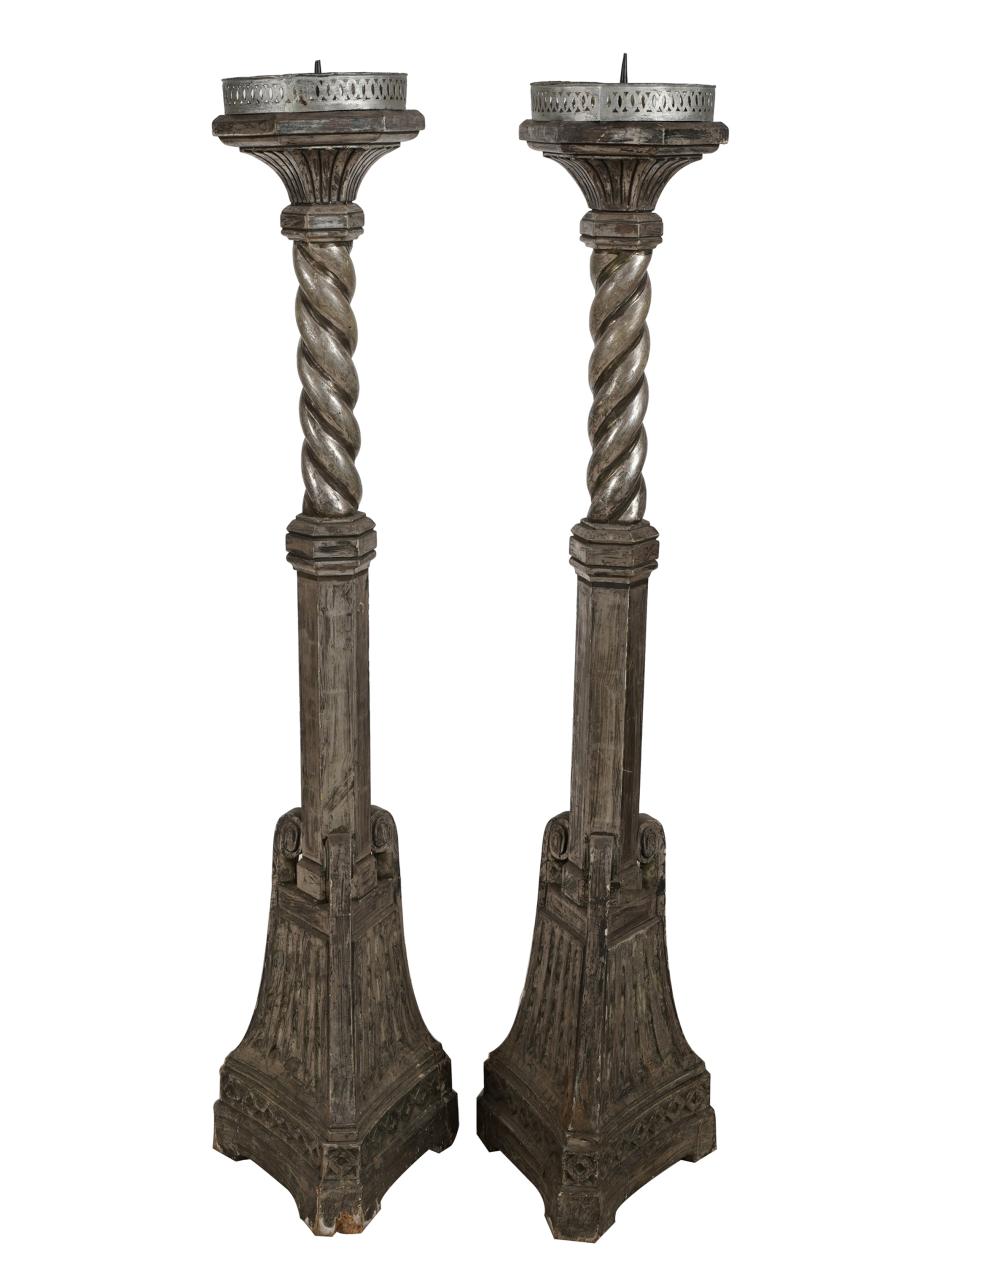 PAIR OF SILVERED WOOD PRICKET STICKSWith 32fb94